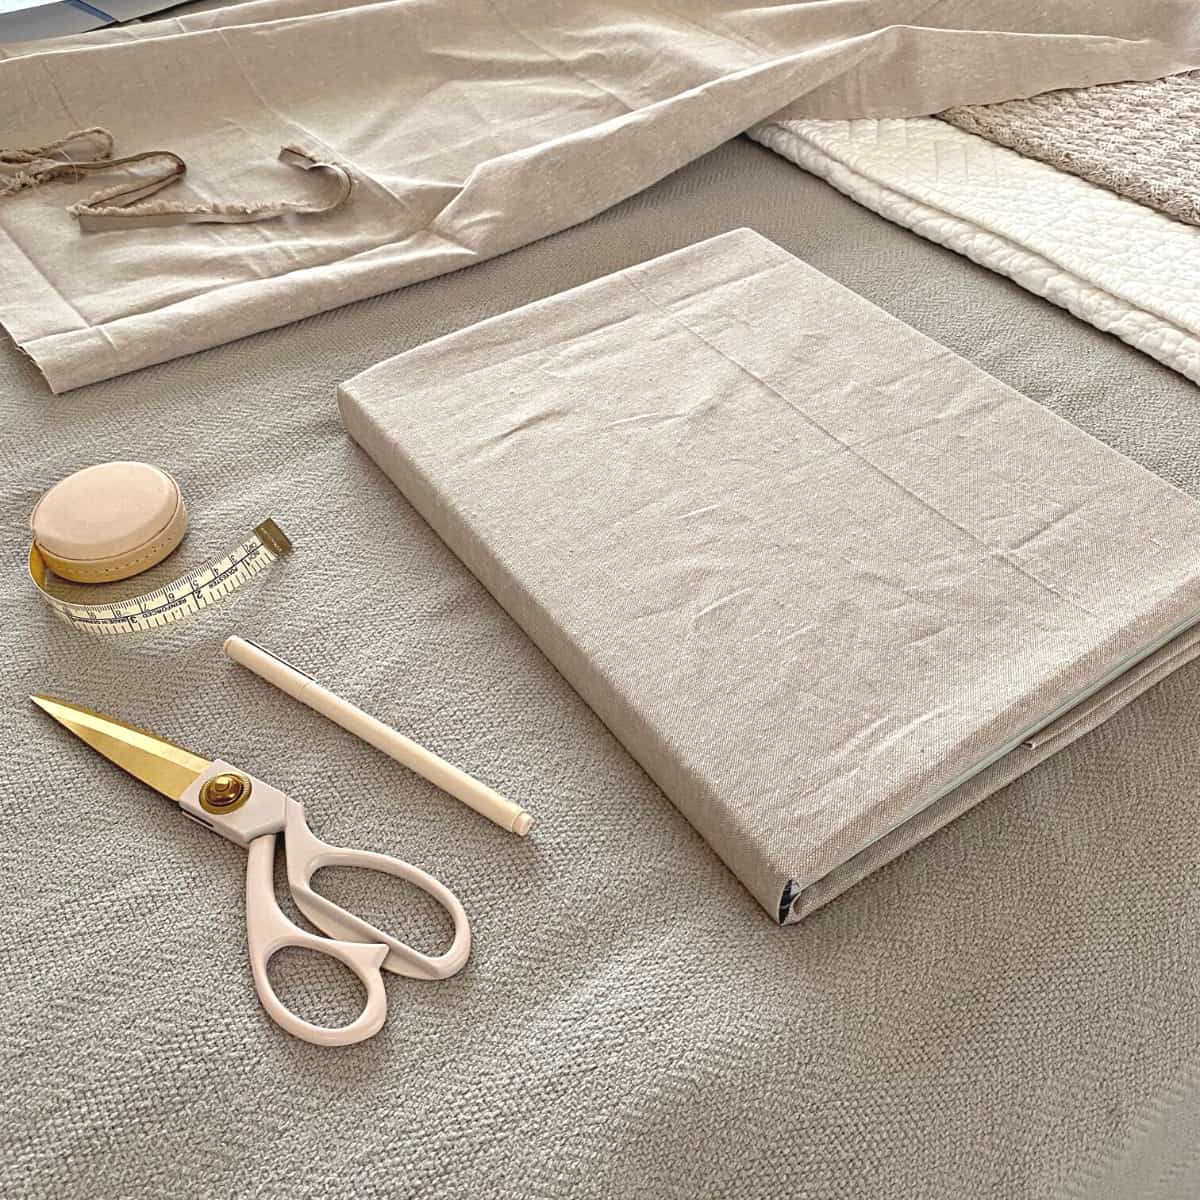 Linen fabric covered book with tape measure, scissors and pen